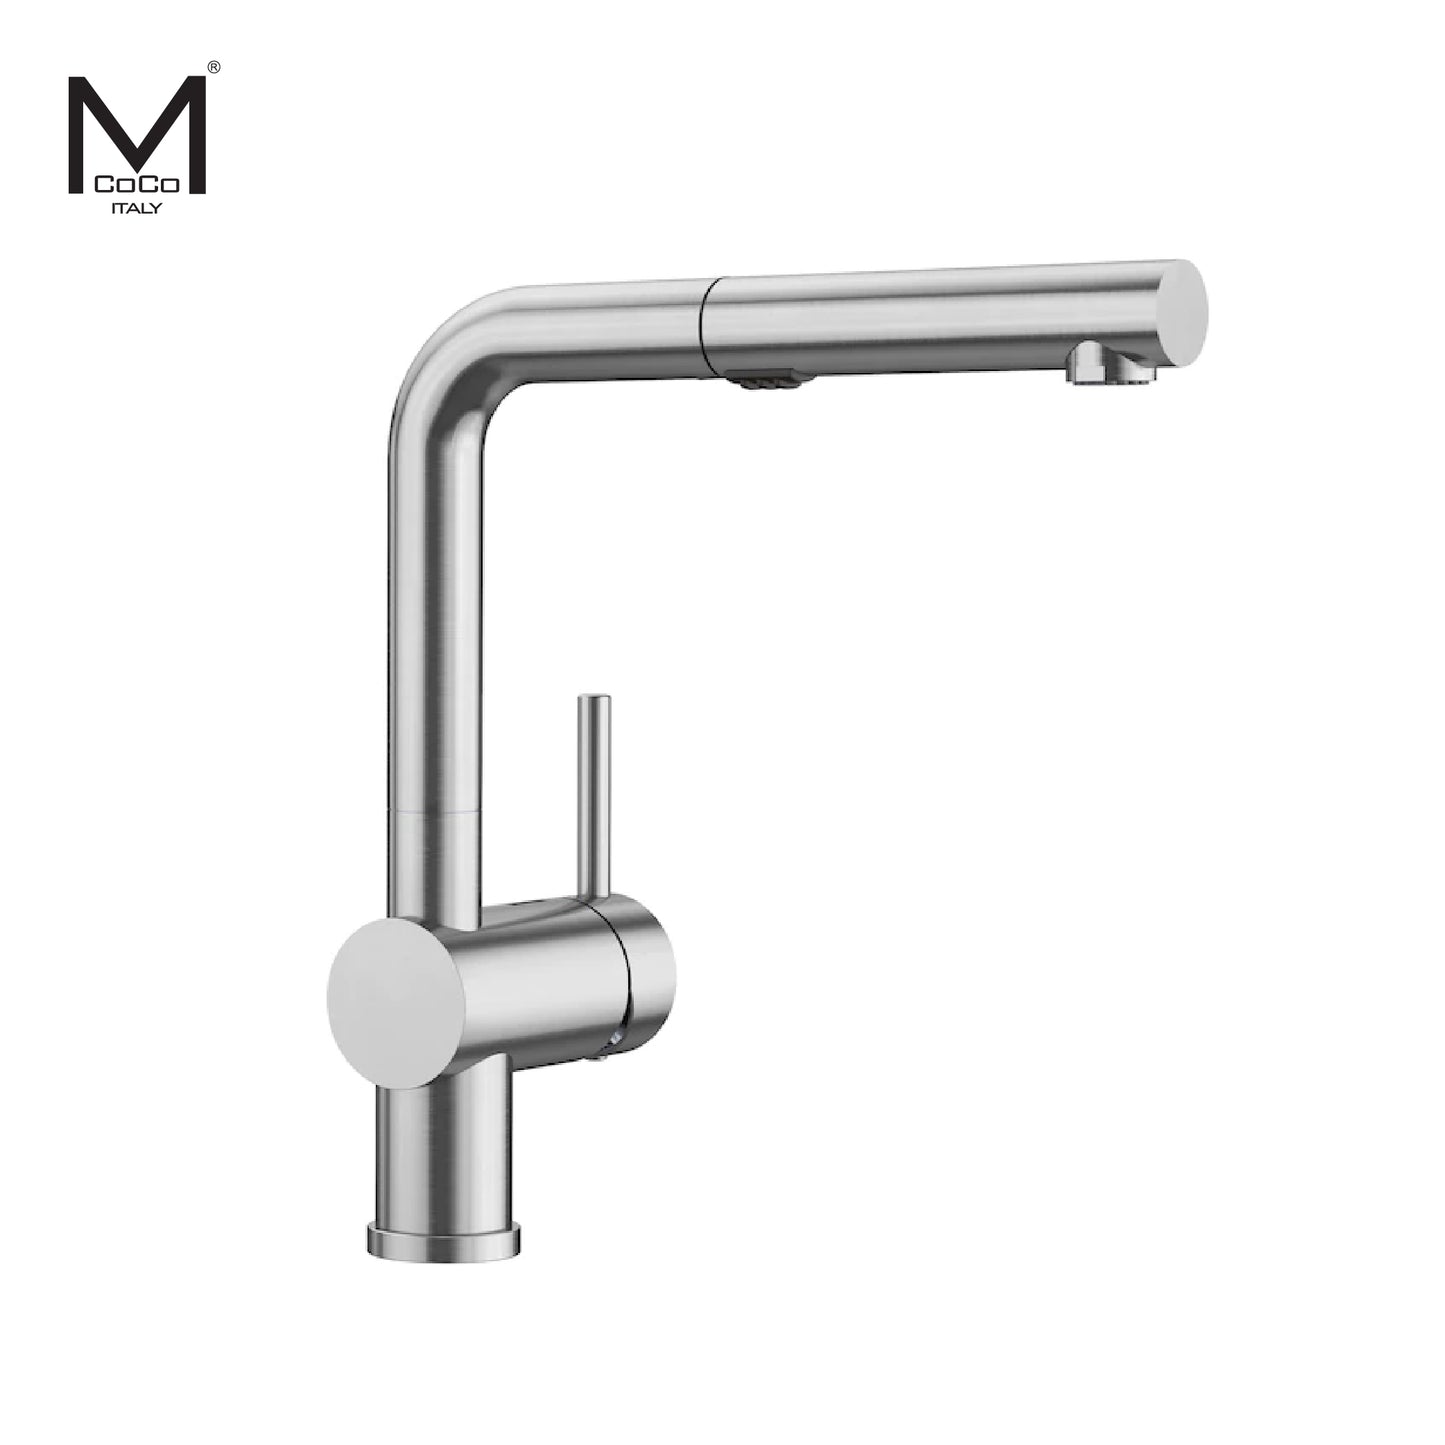 Mcoco Tap Water Faucet Mixer With Flexible Cables Pearl Granite Black & Brushed Stainless Steel Finish - BW7A14B